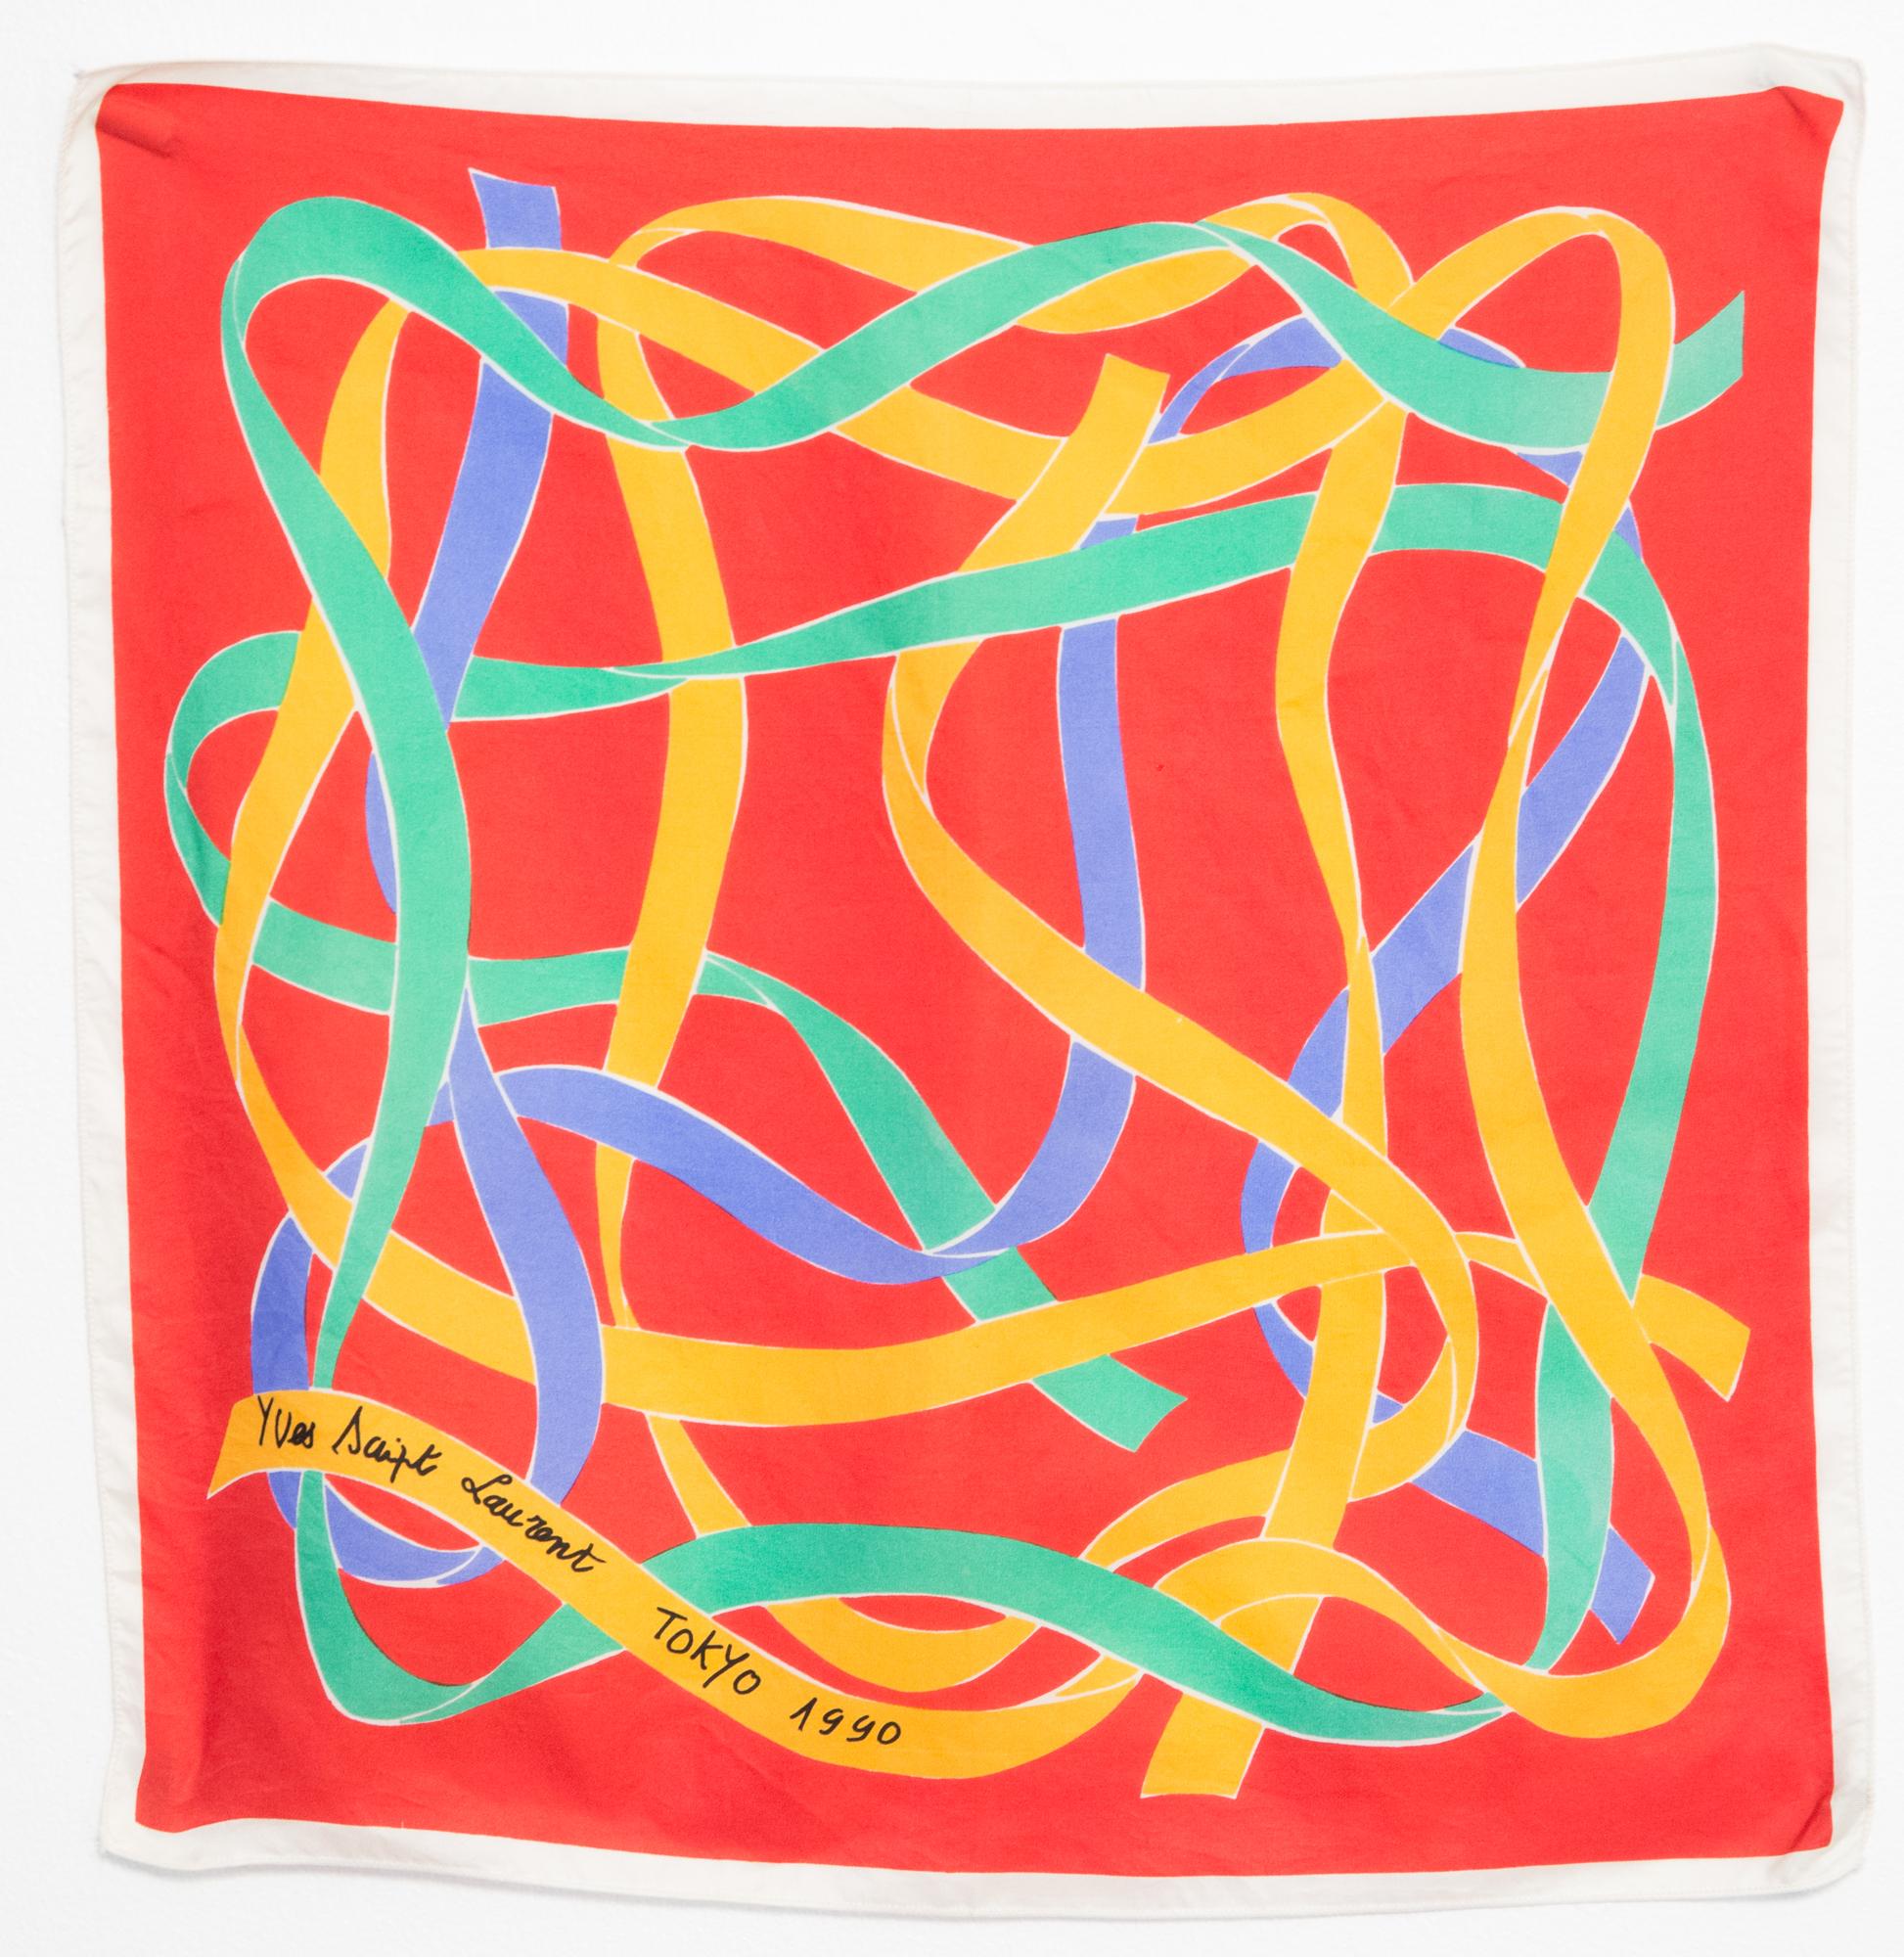  Yves Saint Laurent YSL Red Ribbons Tokyo 1990 Silk Scarf For Sale 2